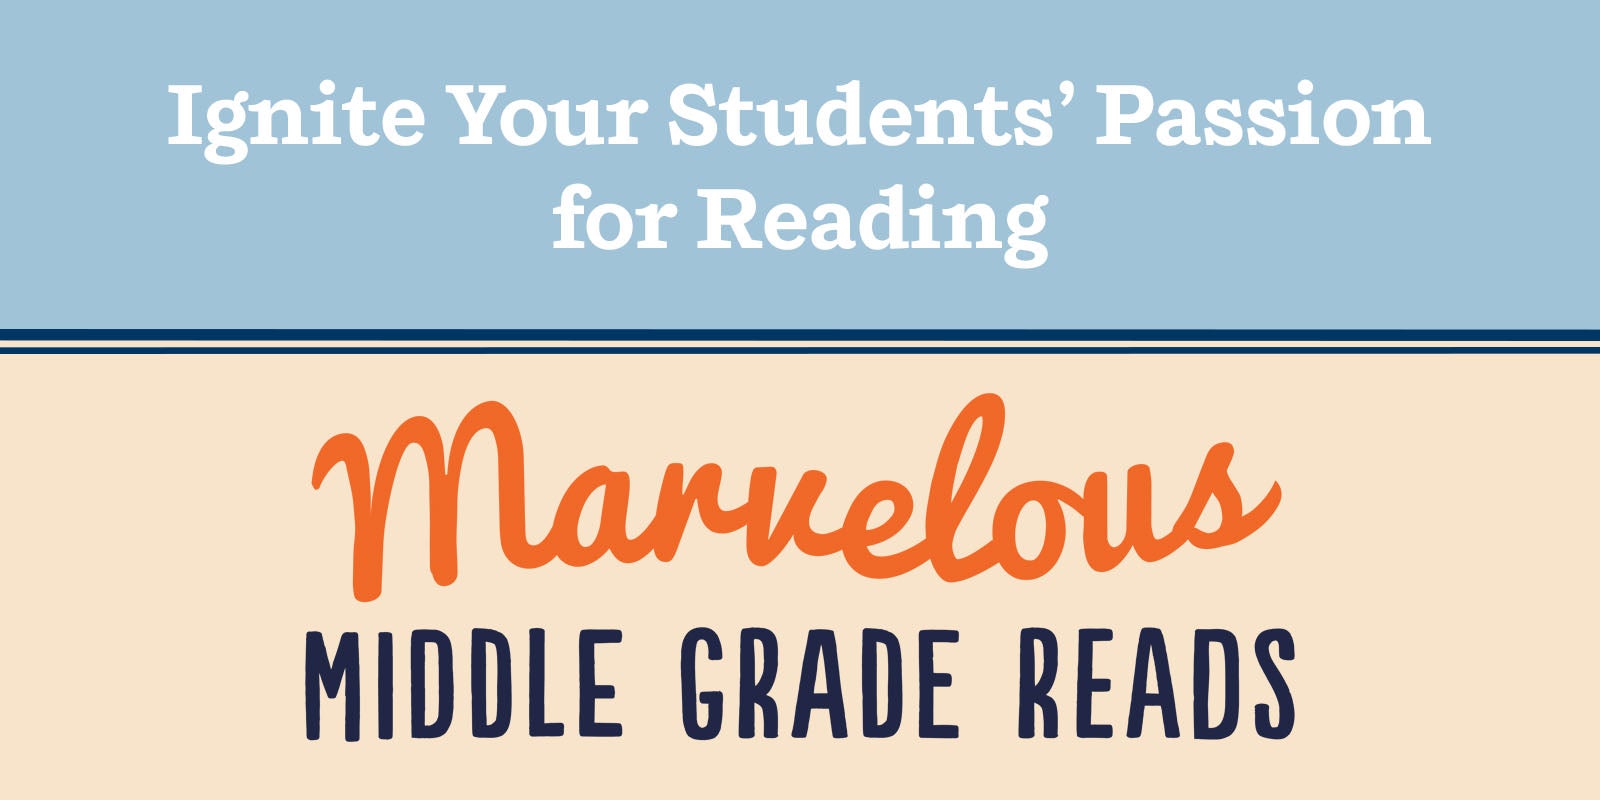 Marvelous Middle Grade Reads: Ignite Your Students’ Passion for Reading with These Great New Books